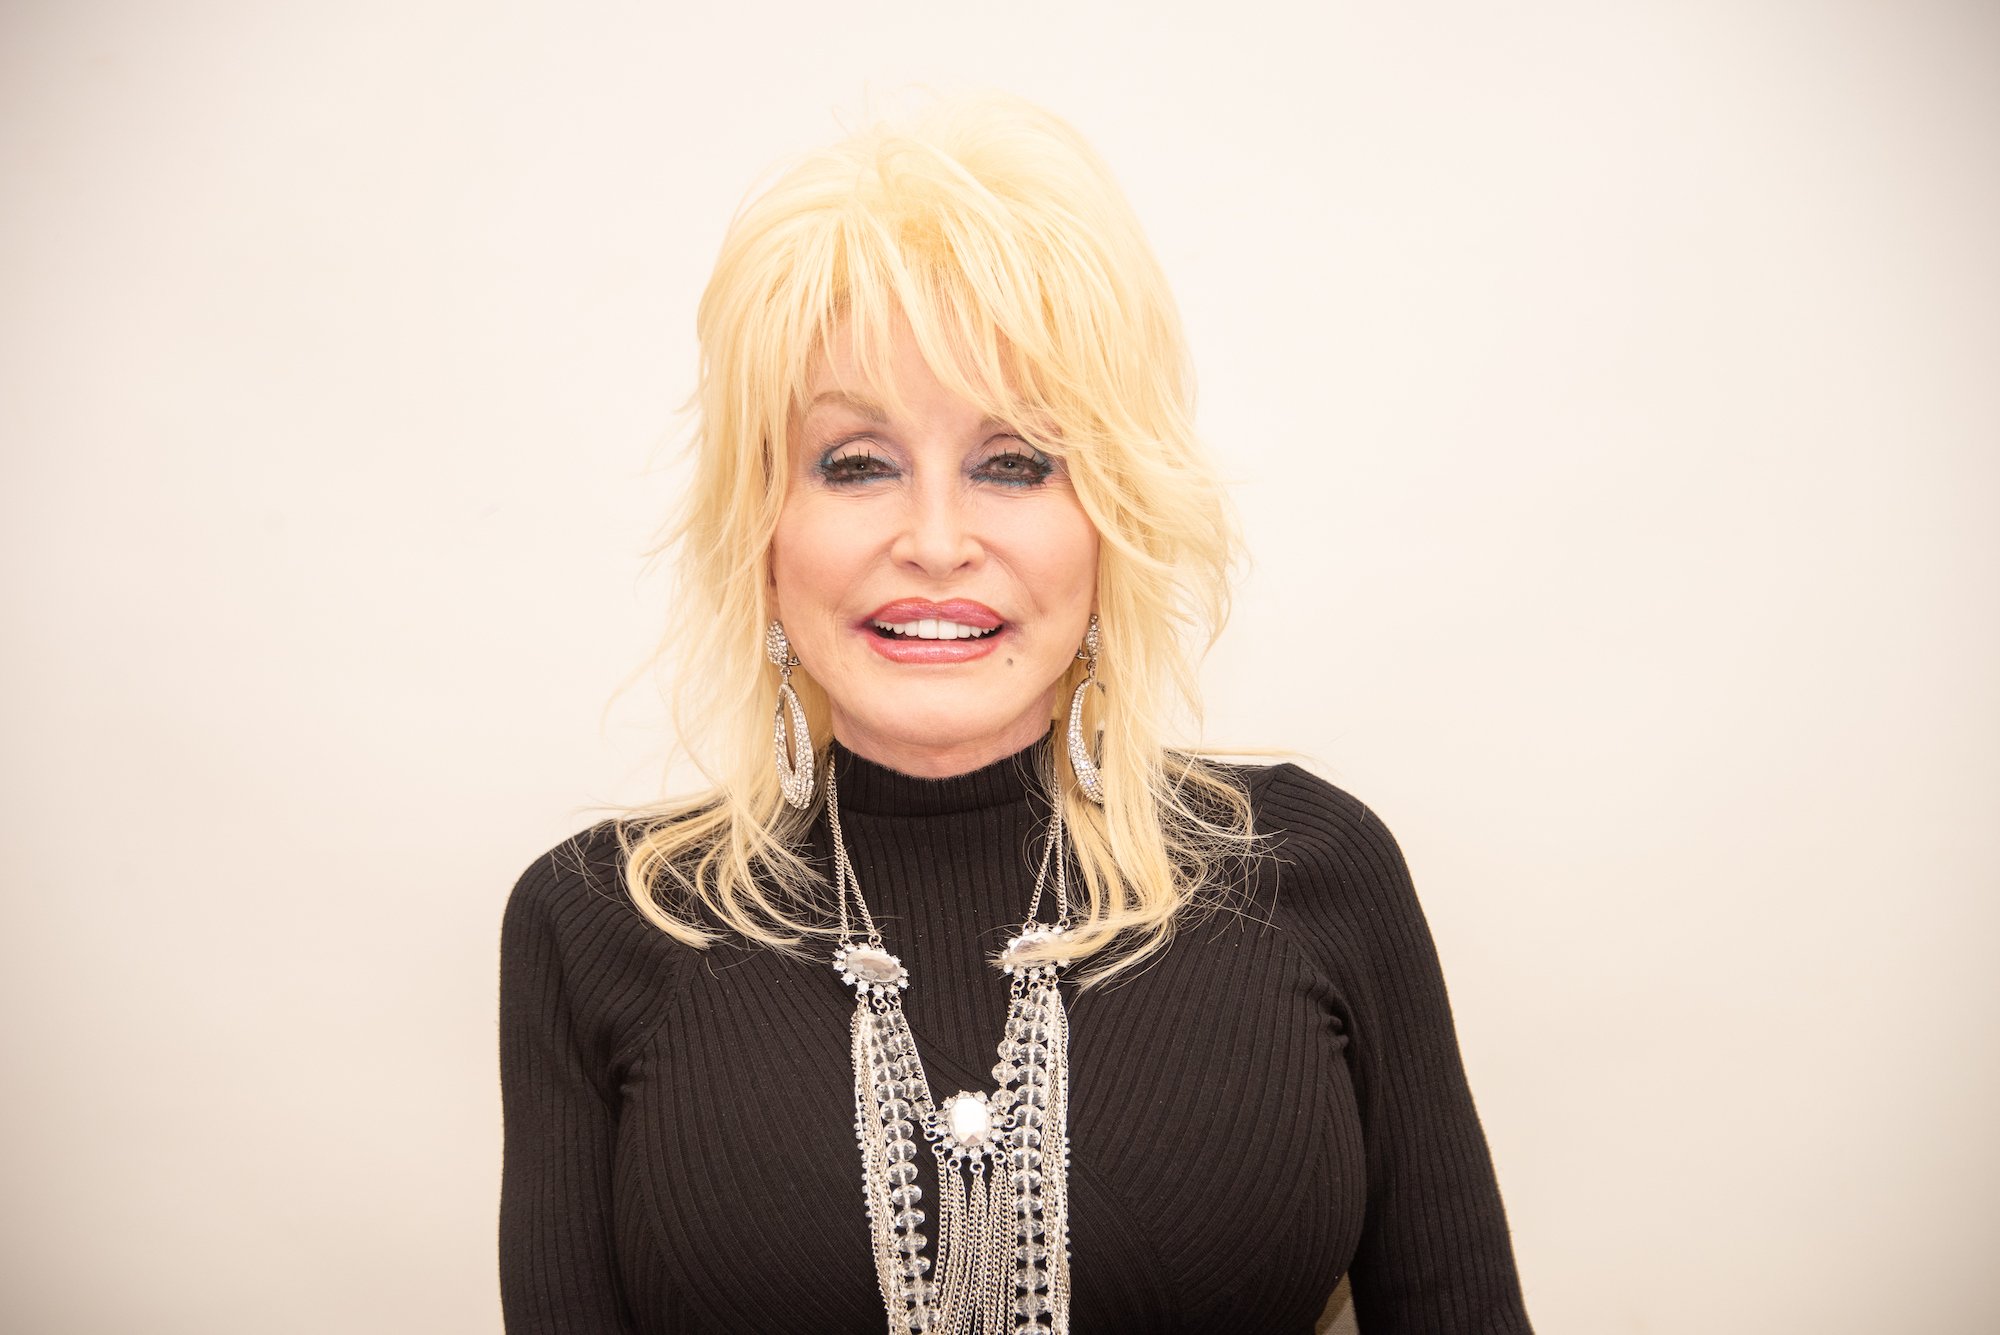 Dolly Parton attending a press conference for Netflix's 'Dumplin' in 2018